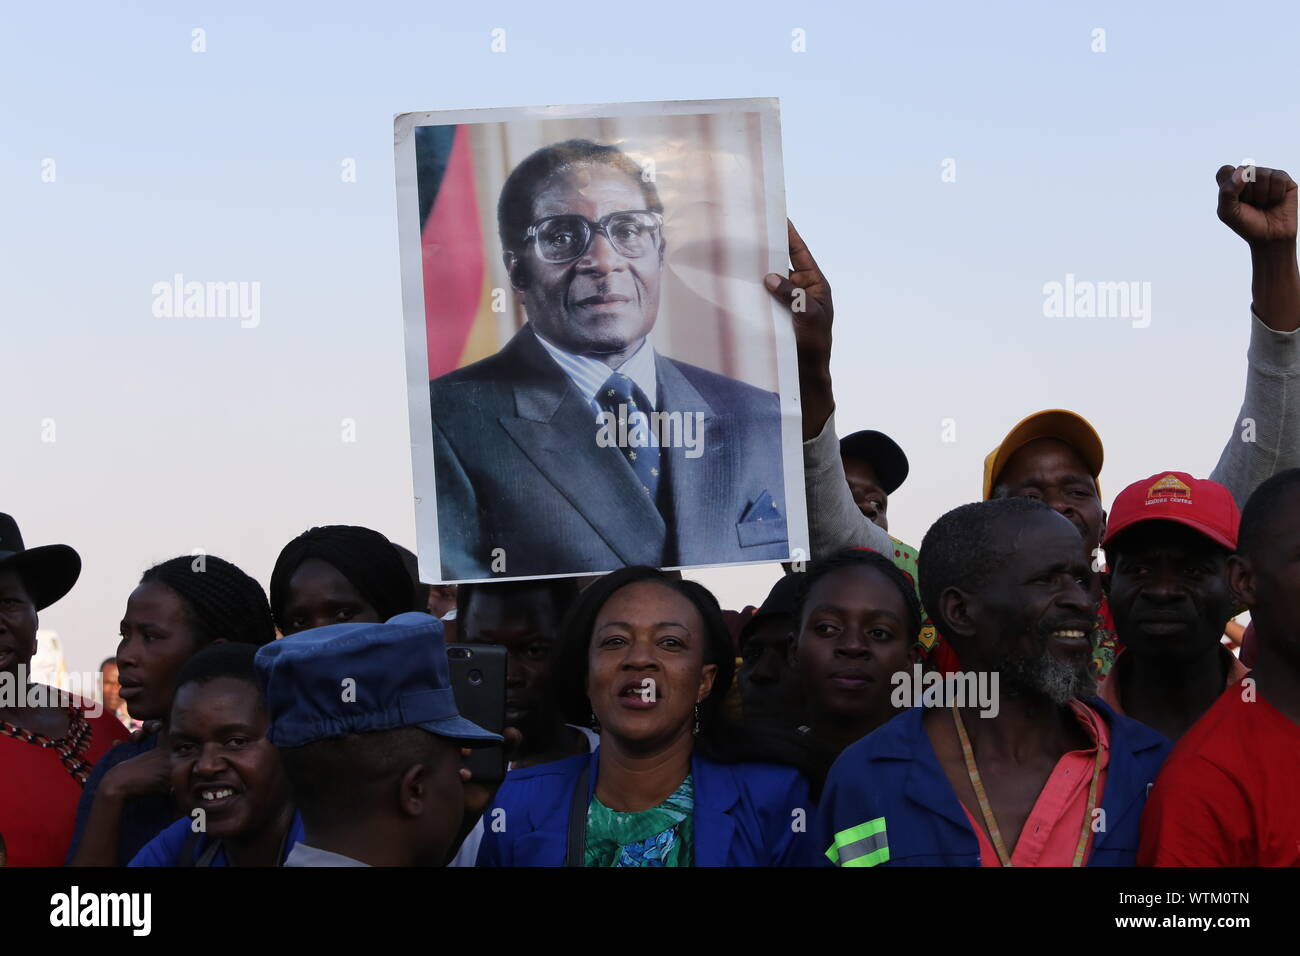 Harare, Zimbabwe. 11th Sep, 2019. Zimbabweans receive the body of the late former Zimbabwean President Robert Mugabe at the Robert Gabriel Mugabe International Airport in Harare, Zimbabwe, on Sept. 11, 2019. The body of the late former Zimbabwean President Robert Mugabe, who died in Singapore last Friday aged 95, arrived in the country on Wednesday afternoon ahead of his burial planned for Sunday. Credit: Chen Yaqin/Xinhua/Alamy Live News Stock Photo